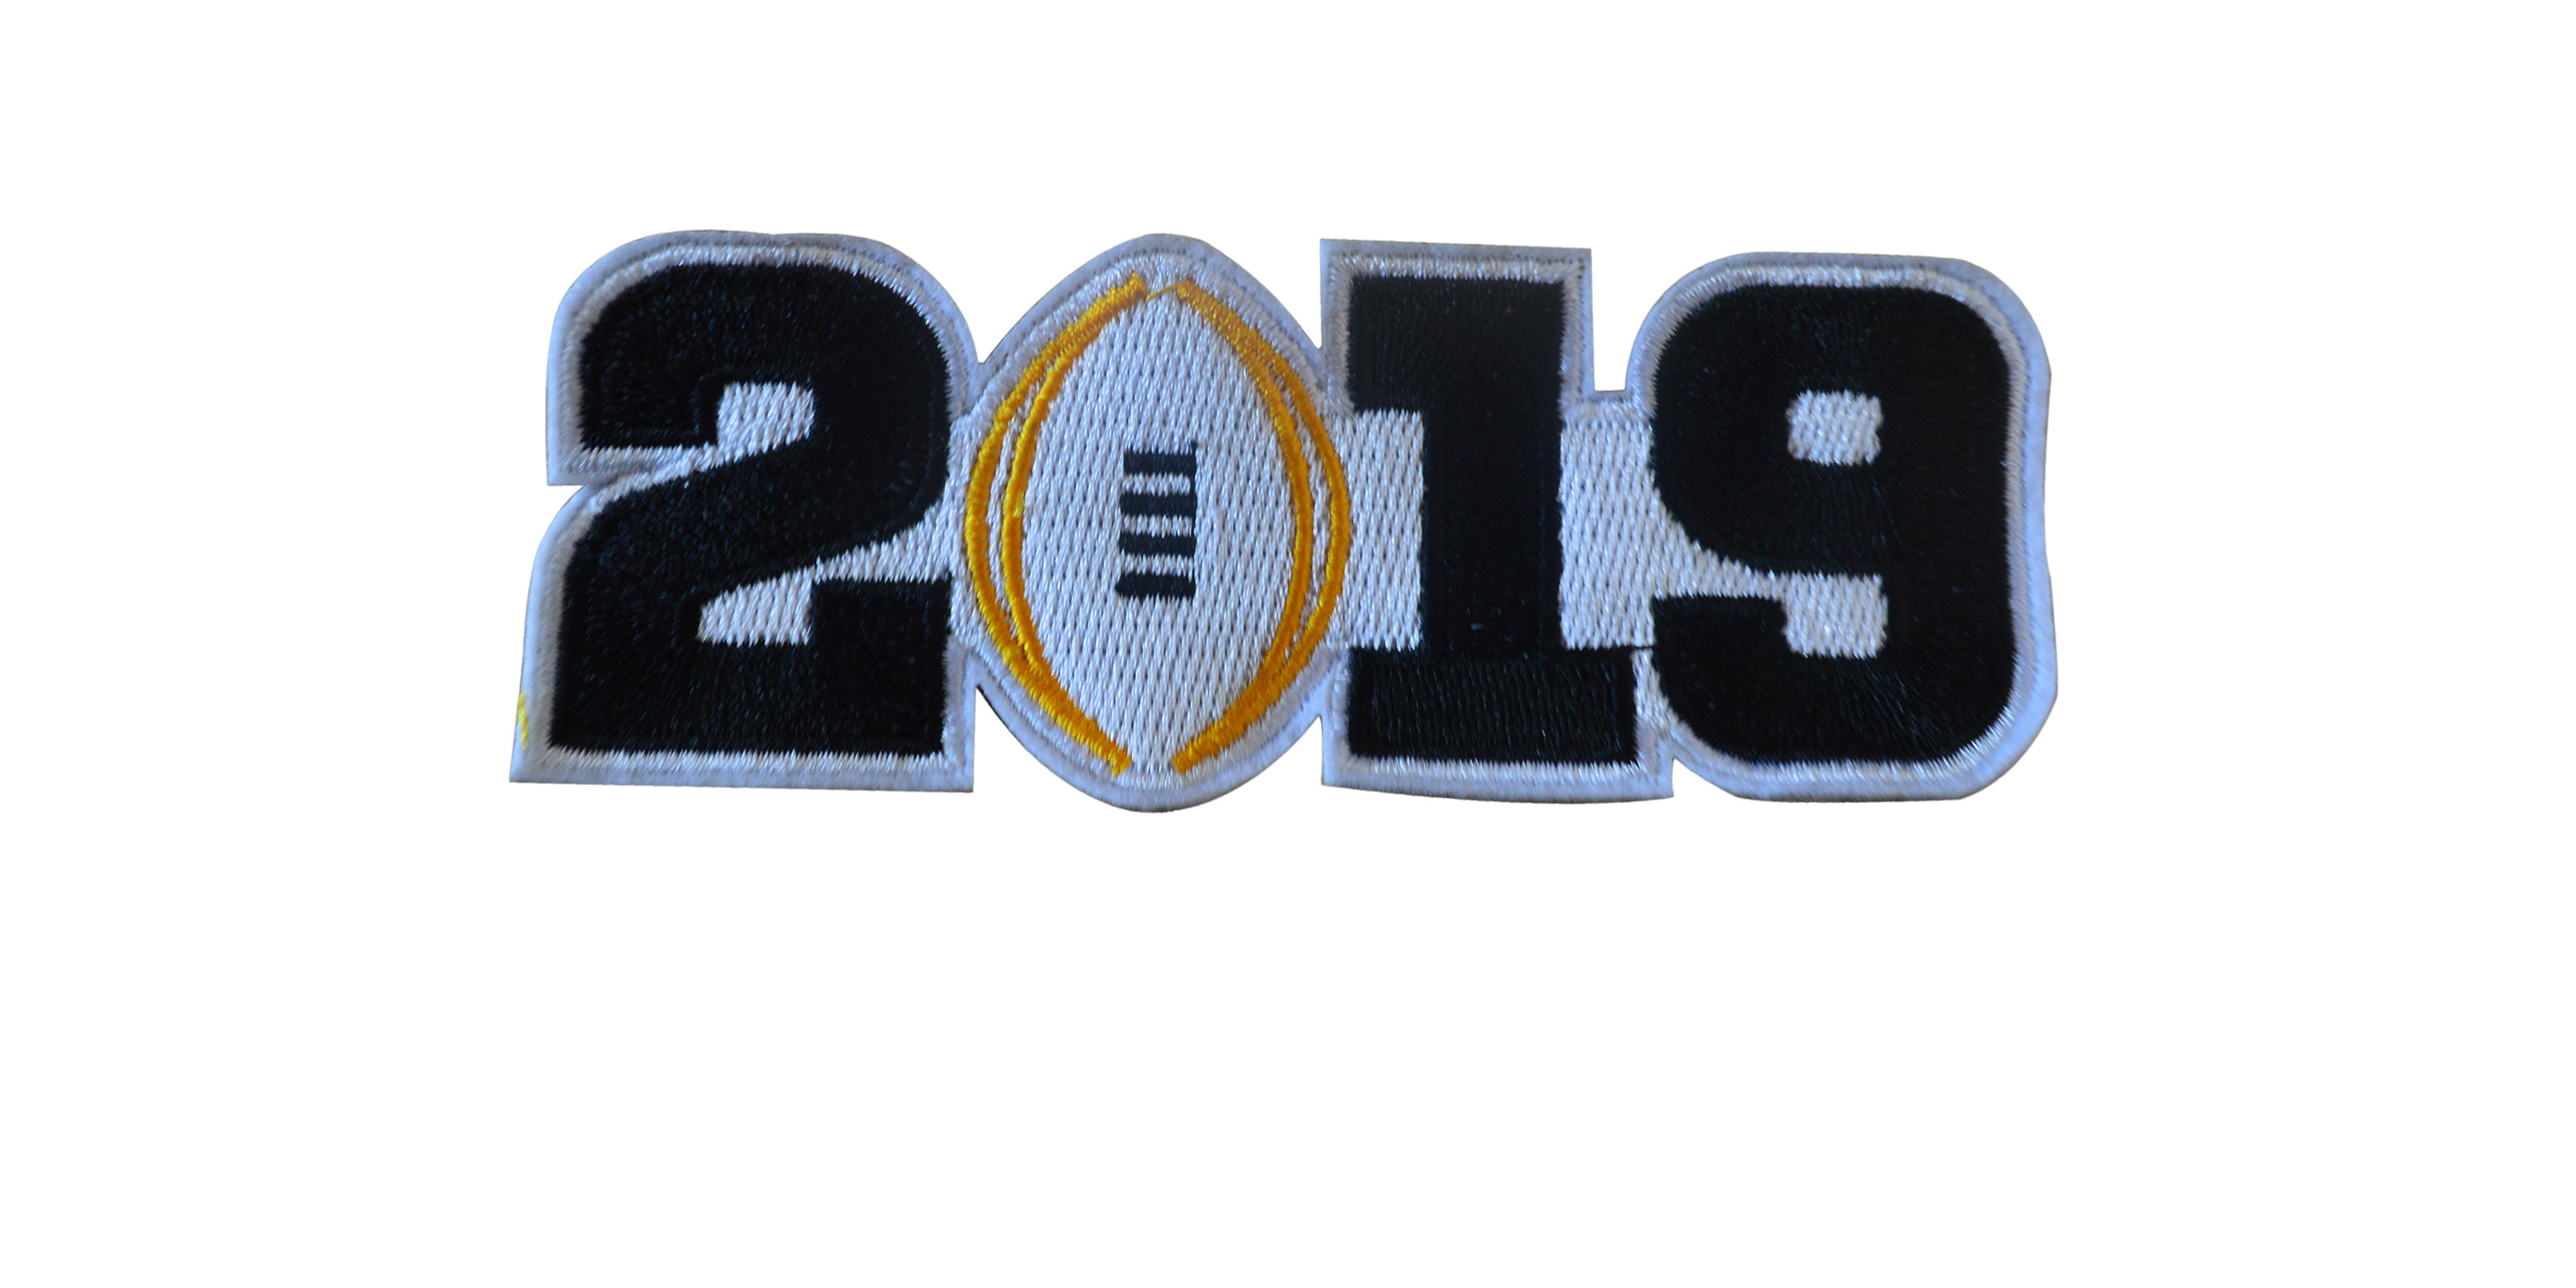 2019 College Football Playoff National Championship Patch Black(Worn By Clemson)